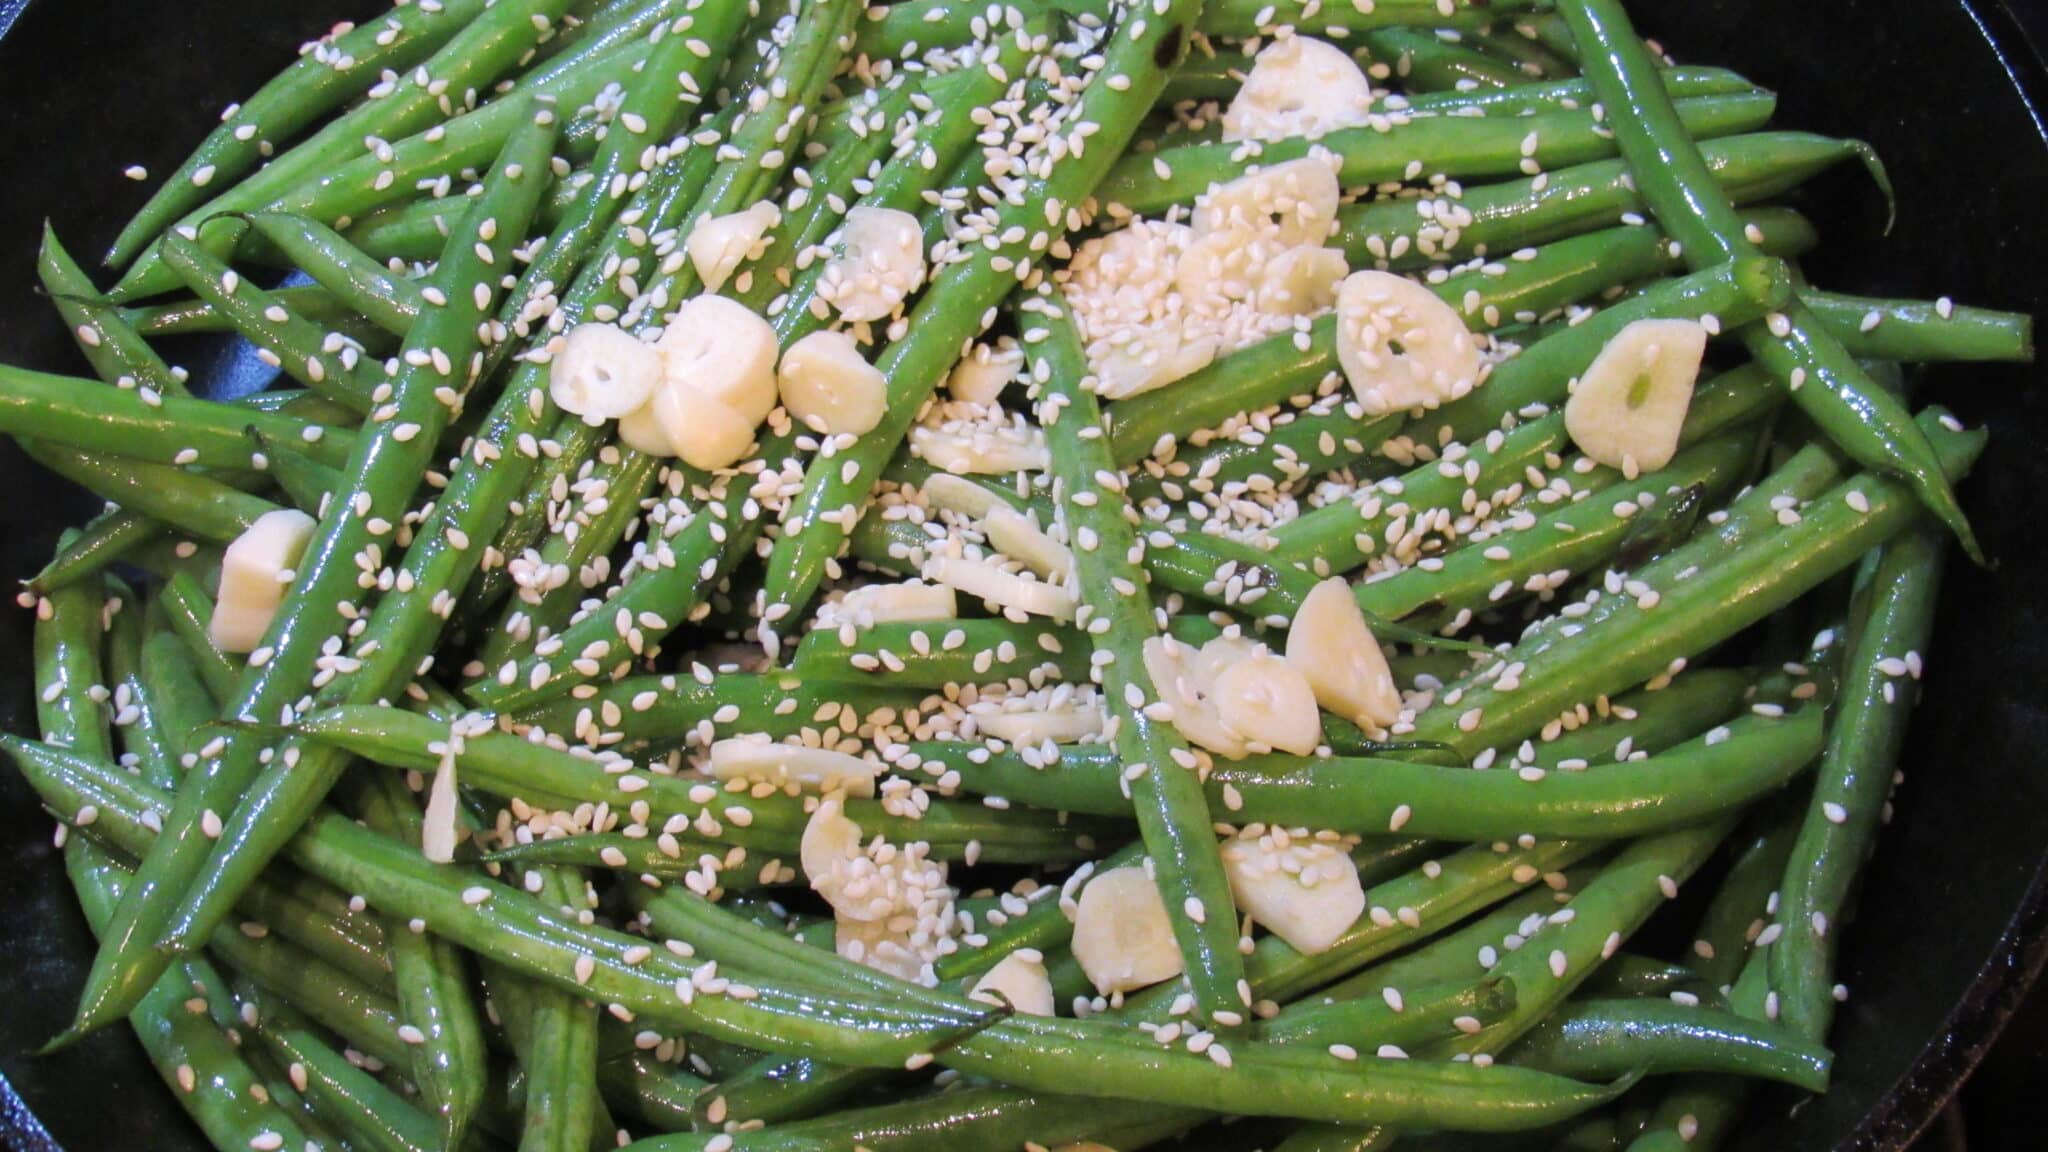 Chopped garlic and sesame seeds are added.